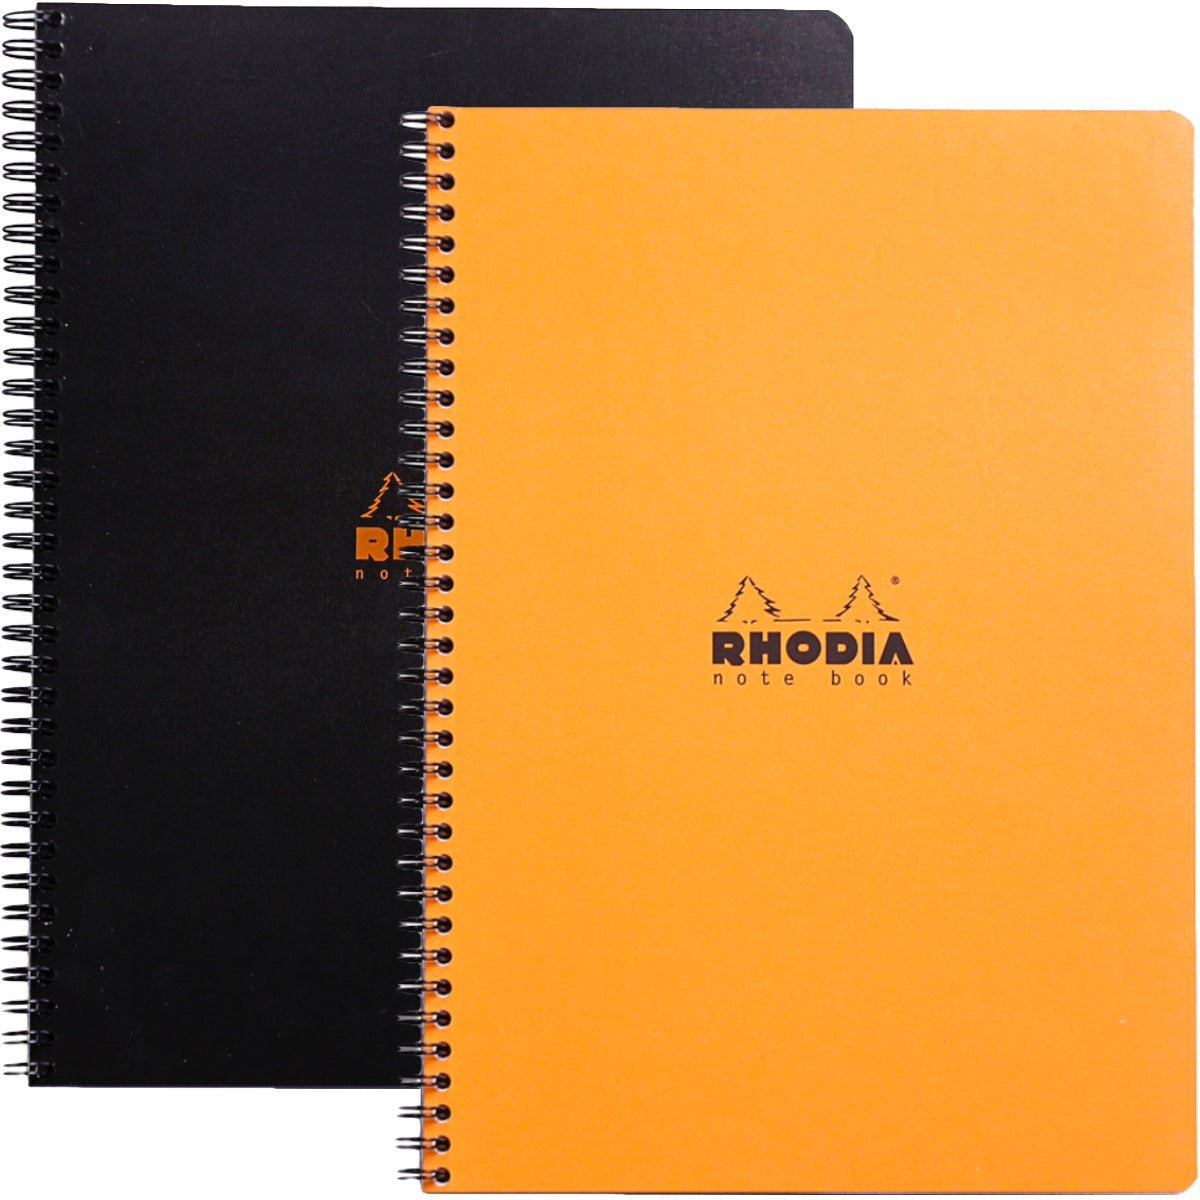 RHODIA Spiral Notebook A4+ with Index, Lined, 80gsm, 160/pages, Assorted Colors